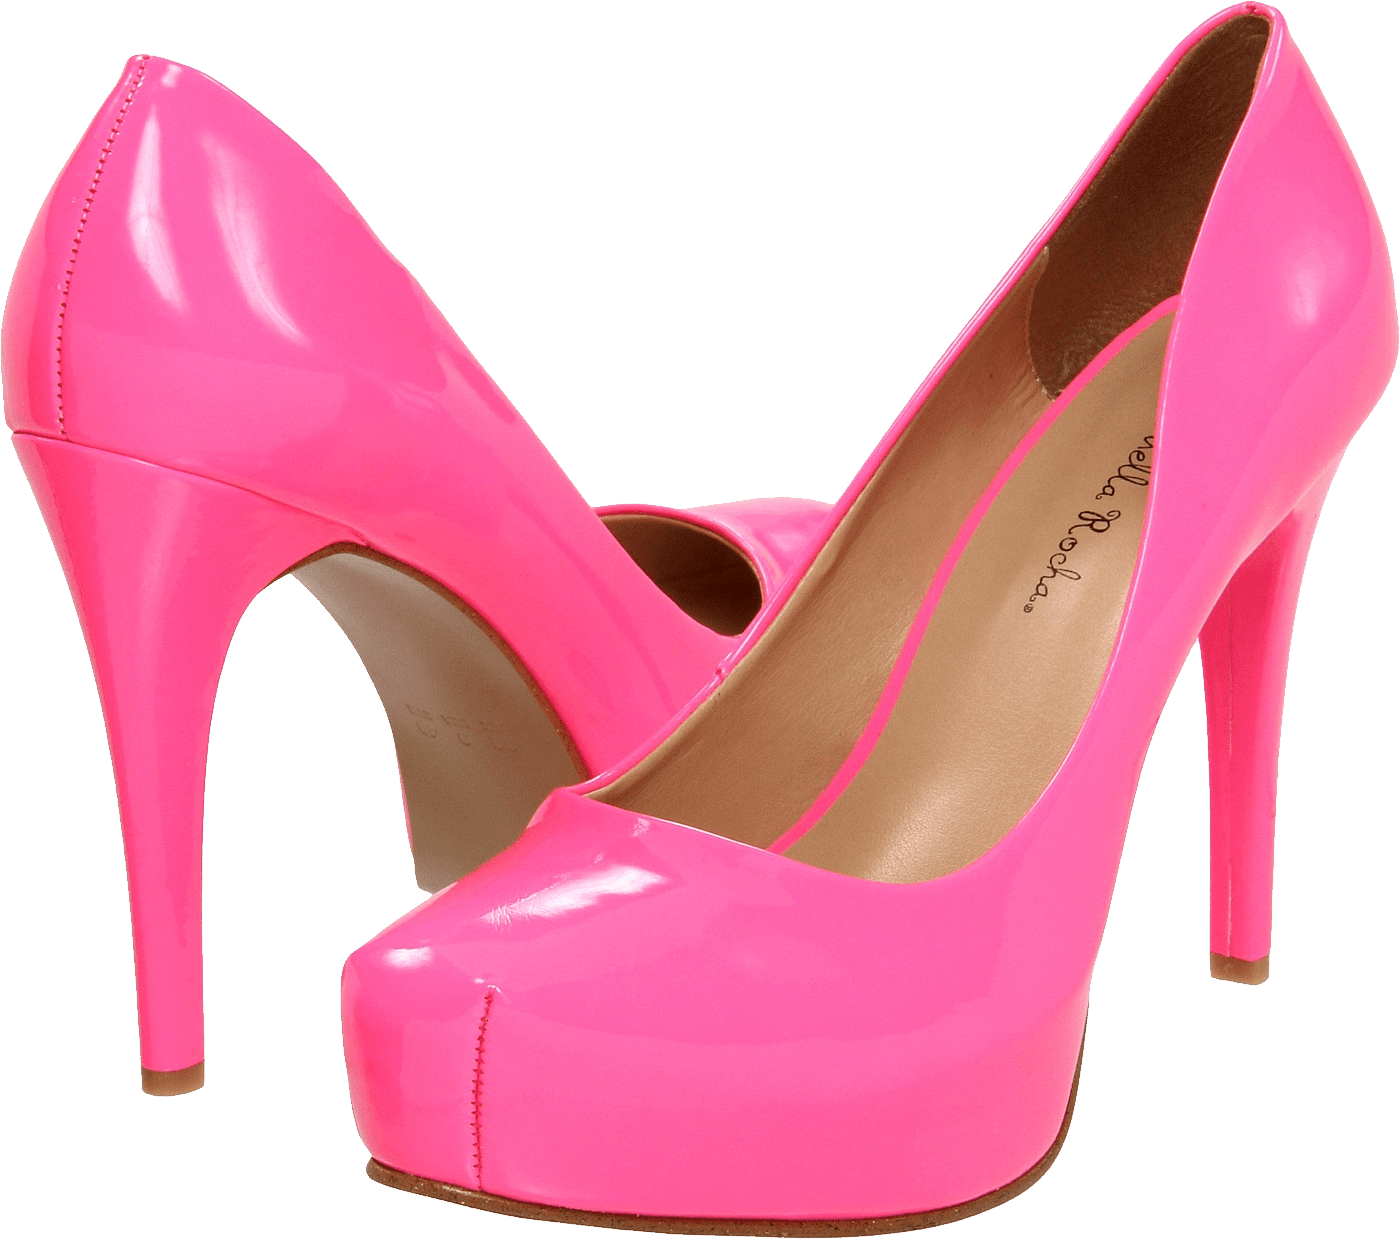 Shoes Image PNG Image